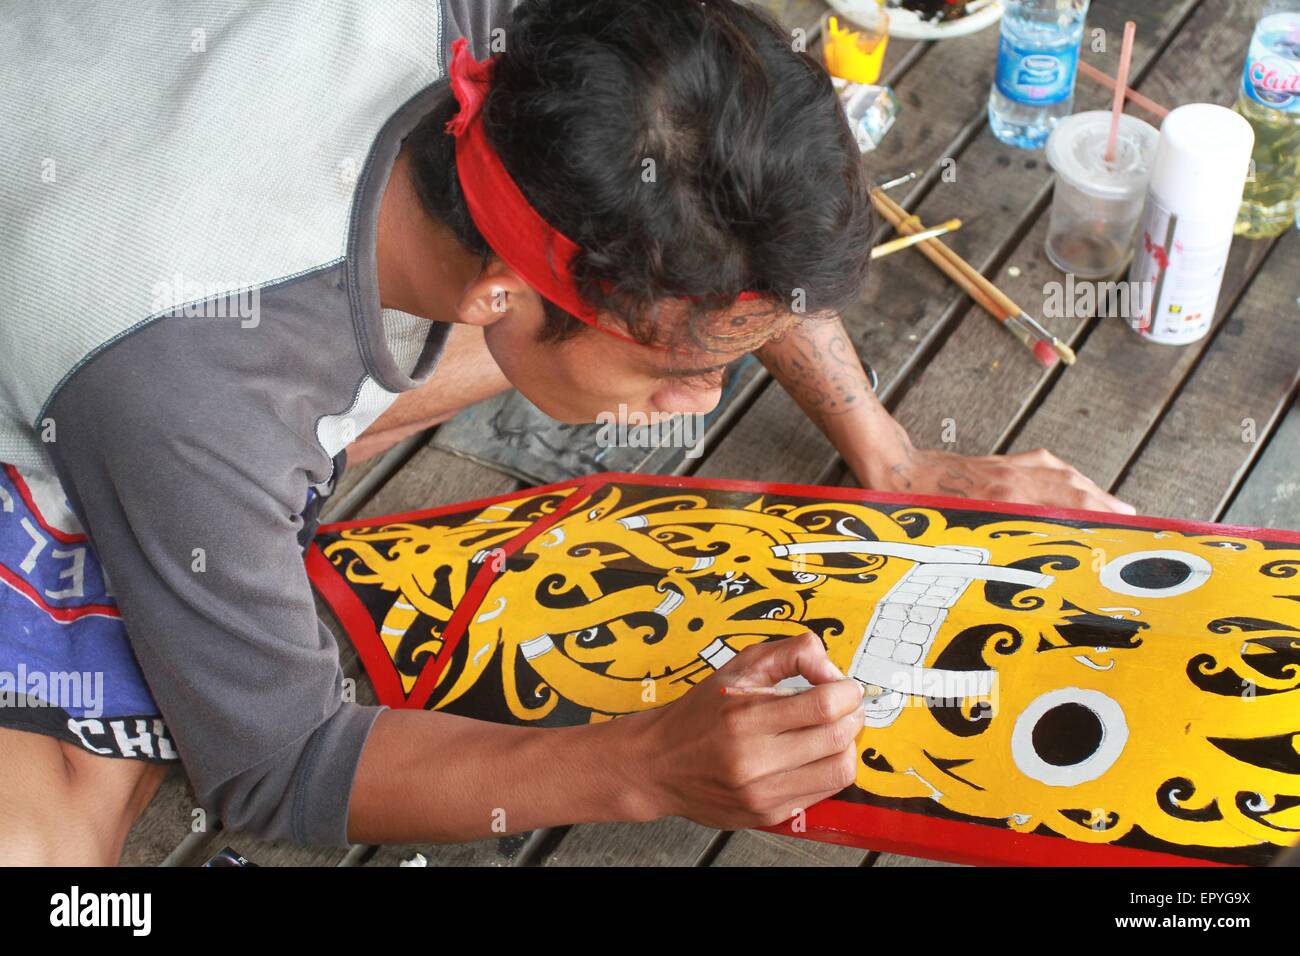 Pontianak, Indonesia. 22nd May, 2015. The craftsman of Dayak competing to curve and paint shield, using the real wood material Borneo's best quality called Belian wood, during the 'Gawai Dayak 2015'. © Yohanes Kurnia Irawan/PacificPress/Alamy Live News Stock Photo